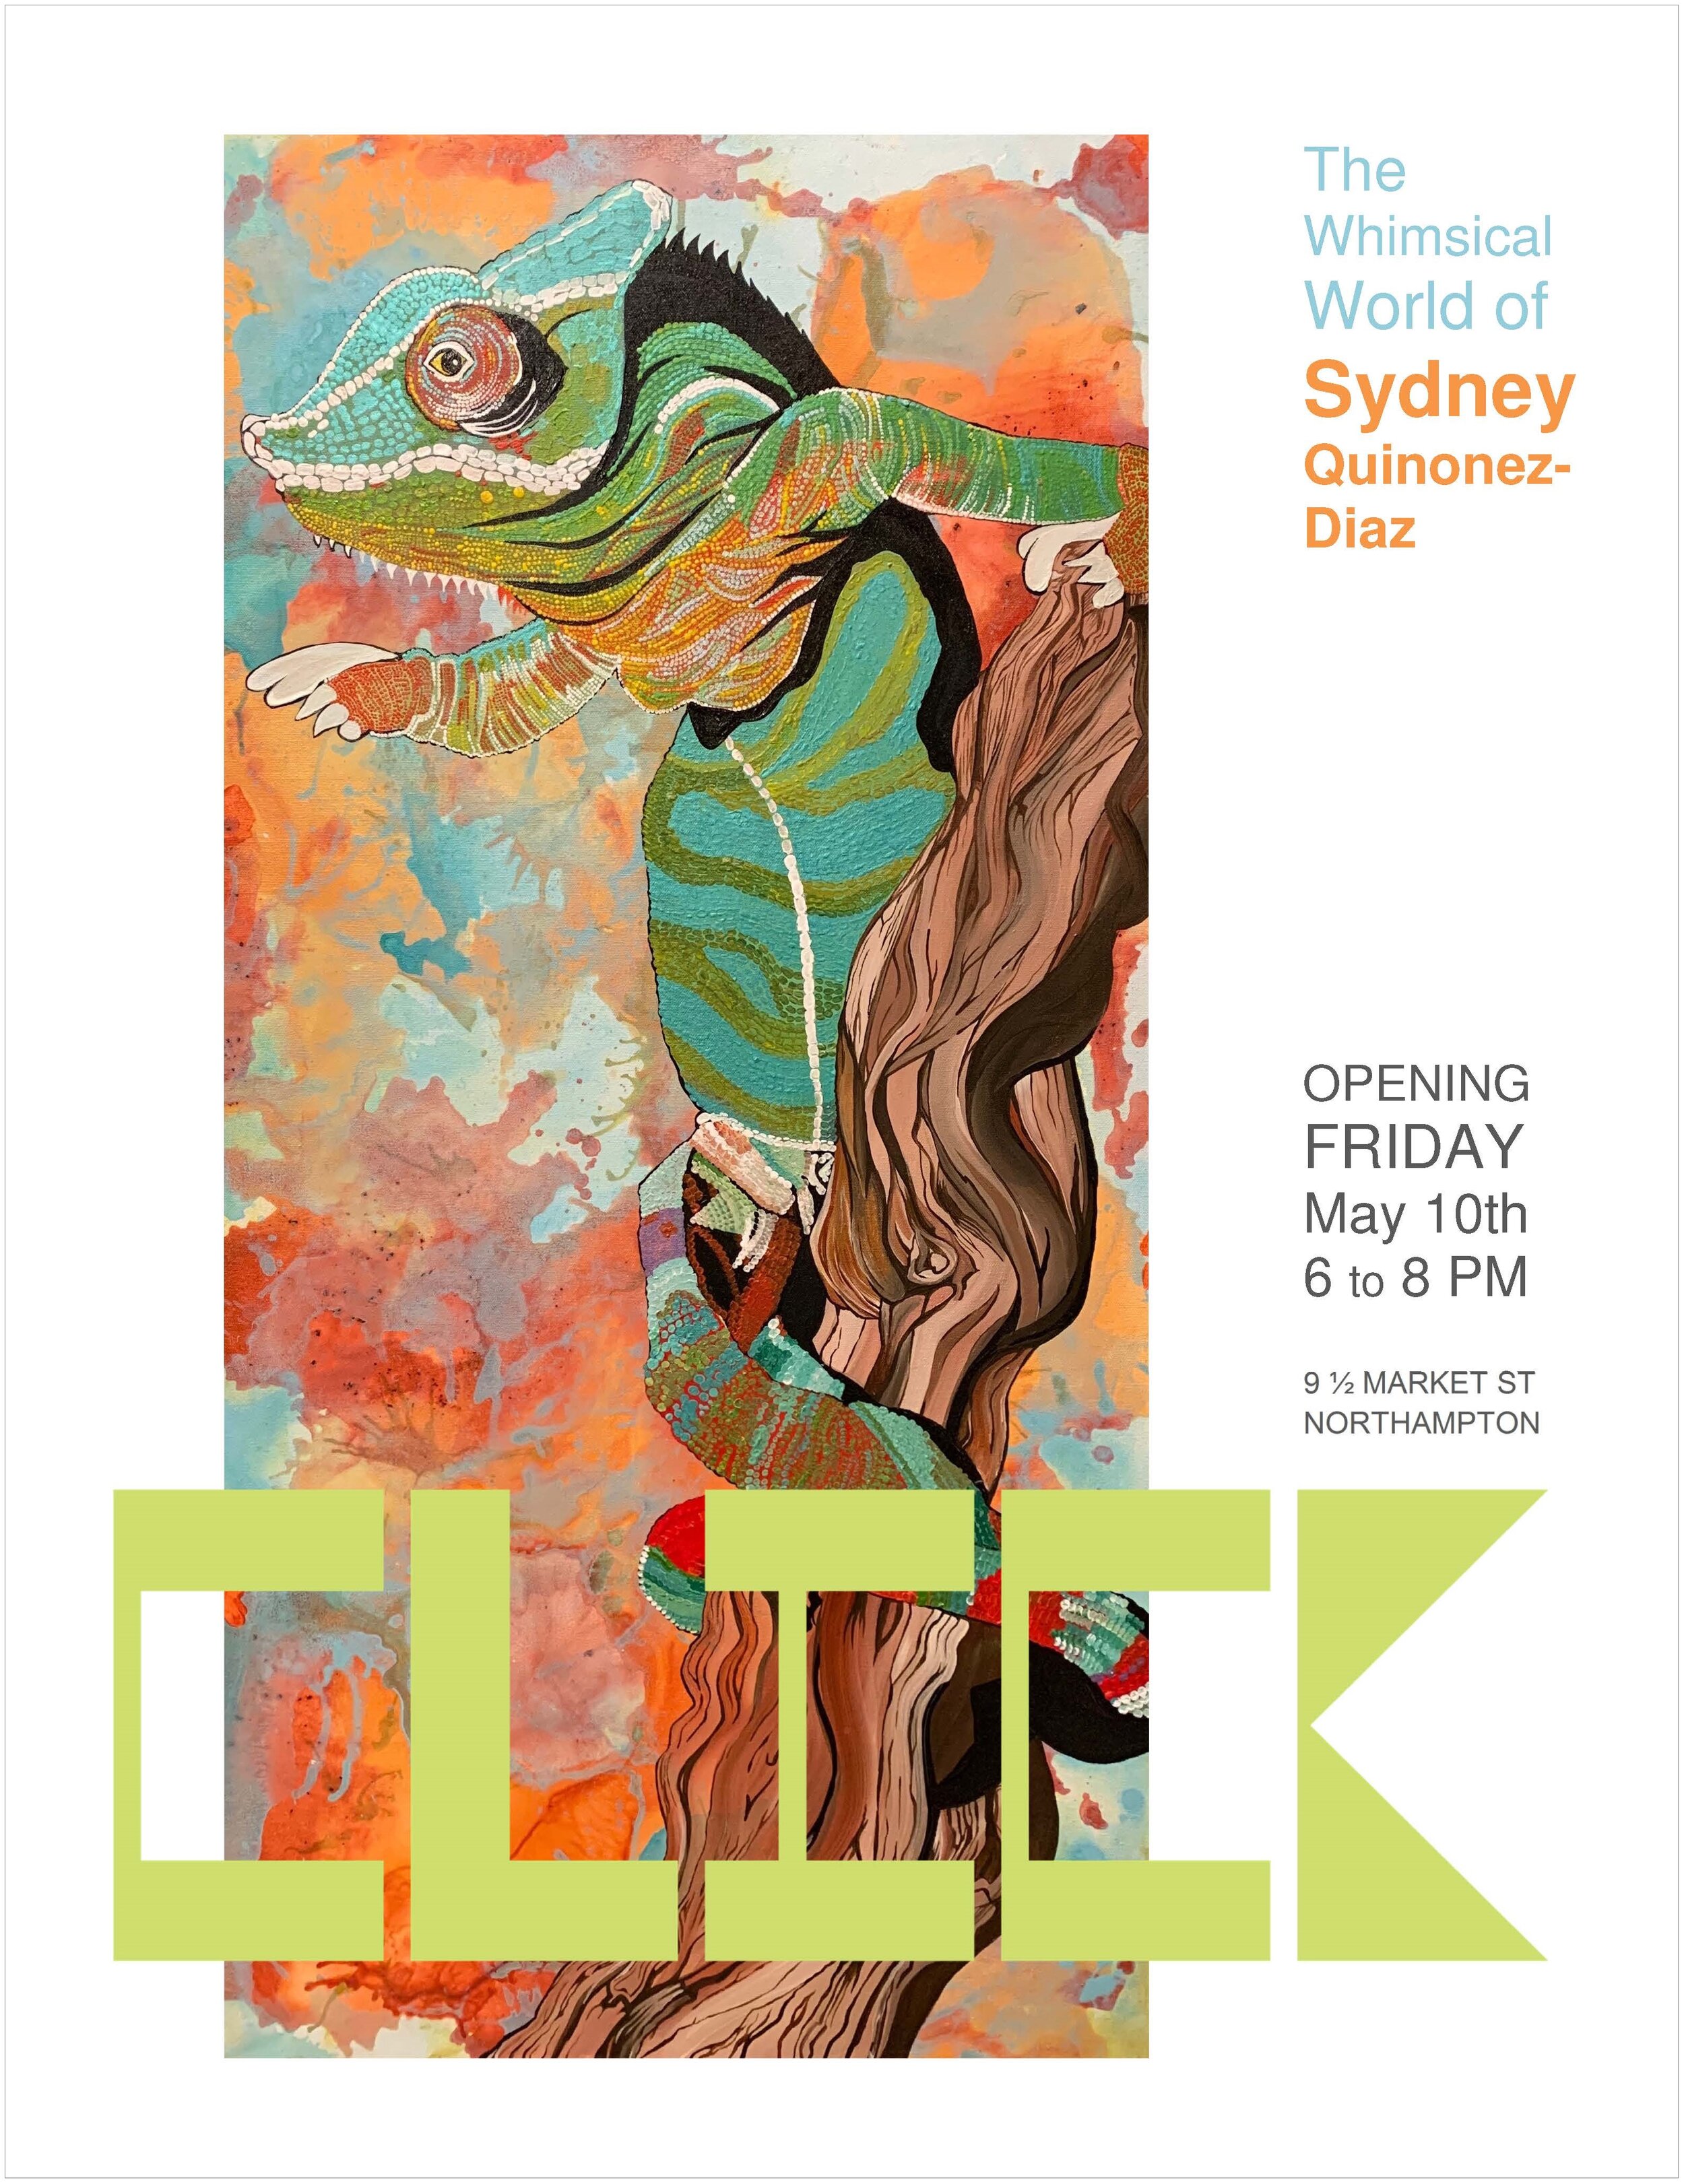  Flyer for The Whimsical World of Sydney Quinonez-Diaz at CLICK. 